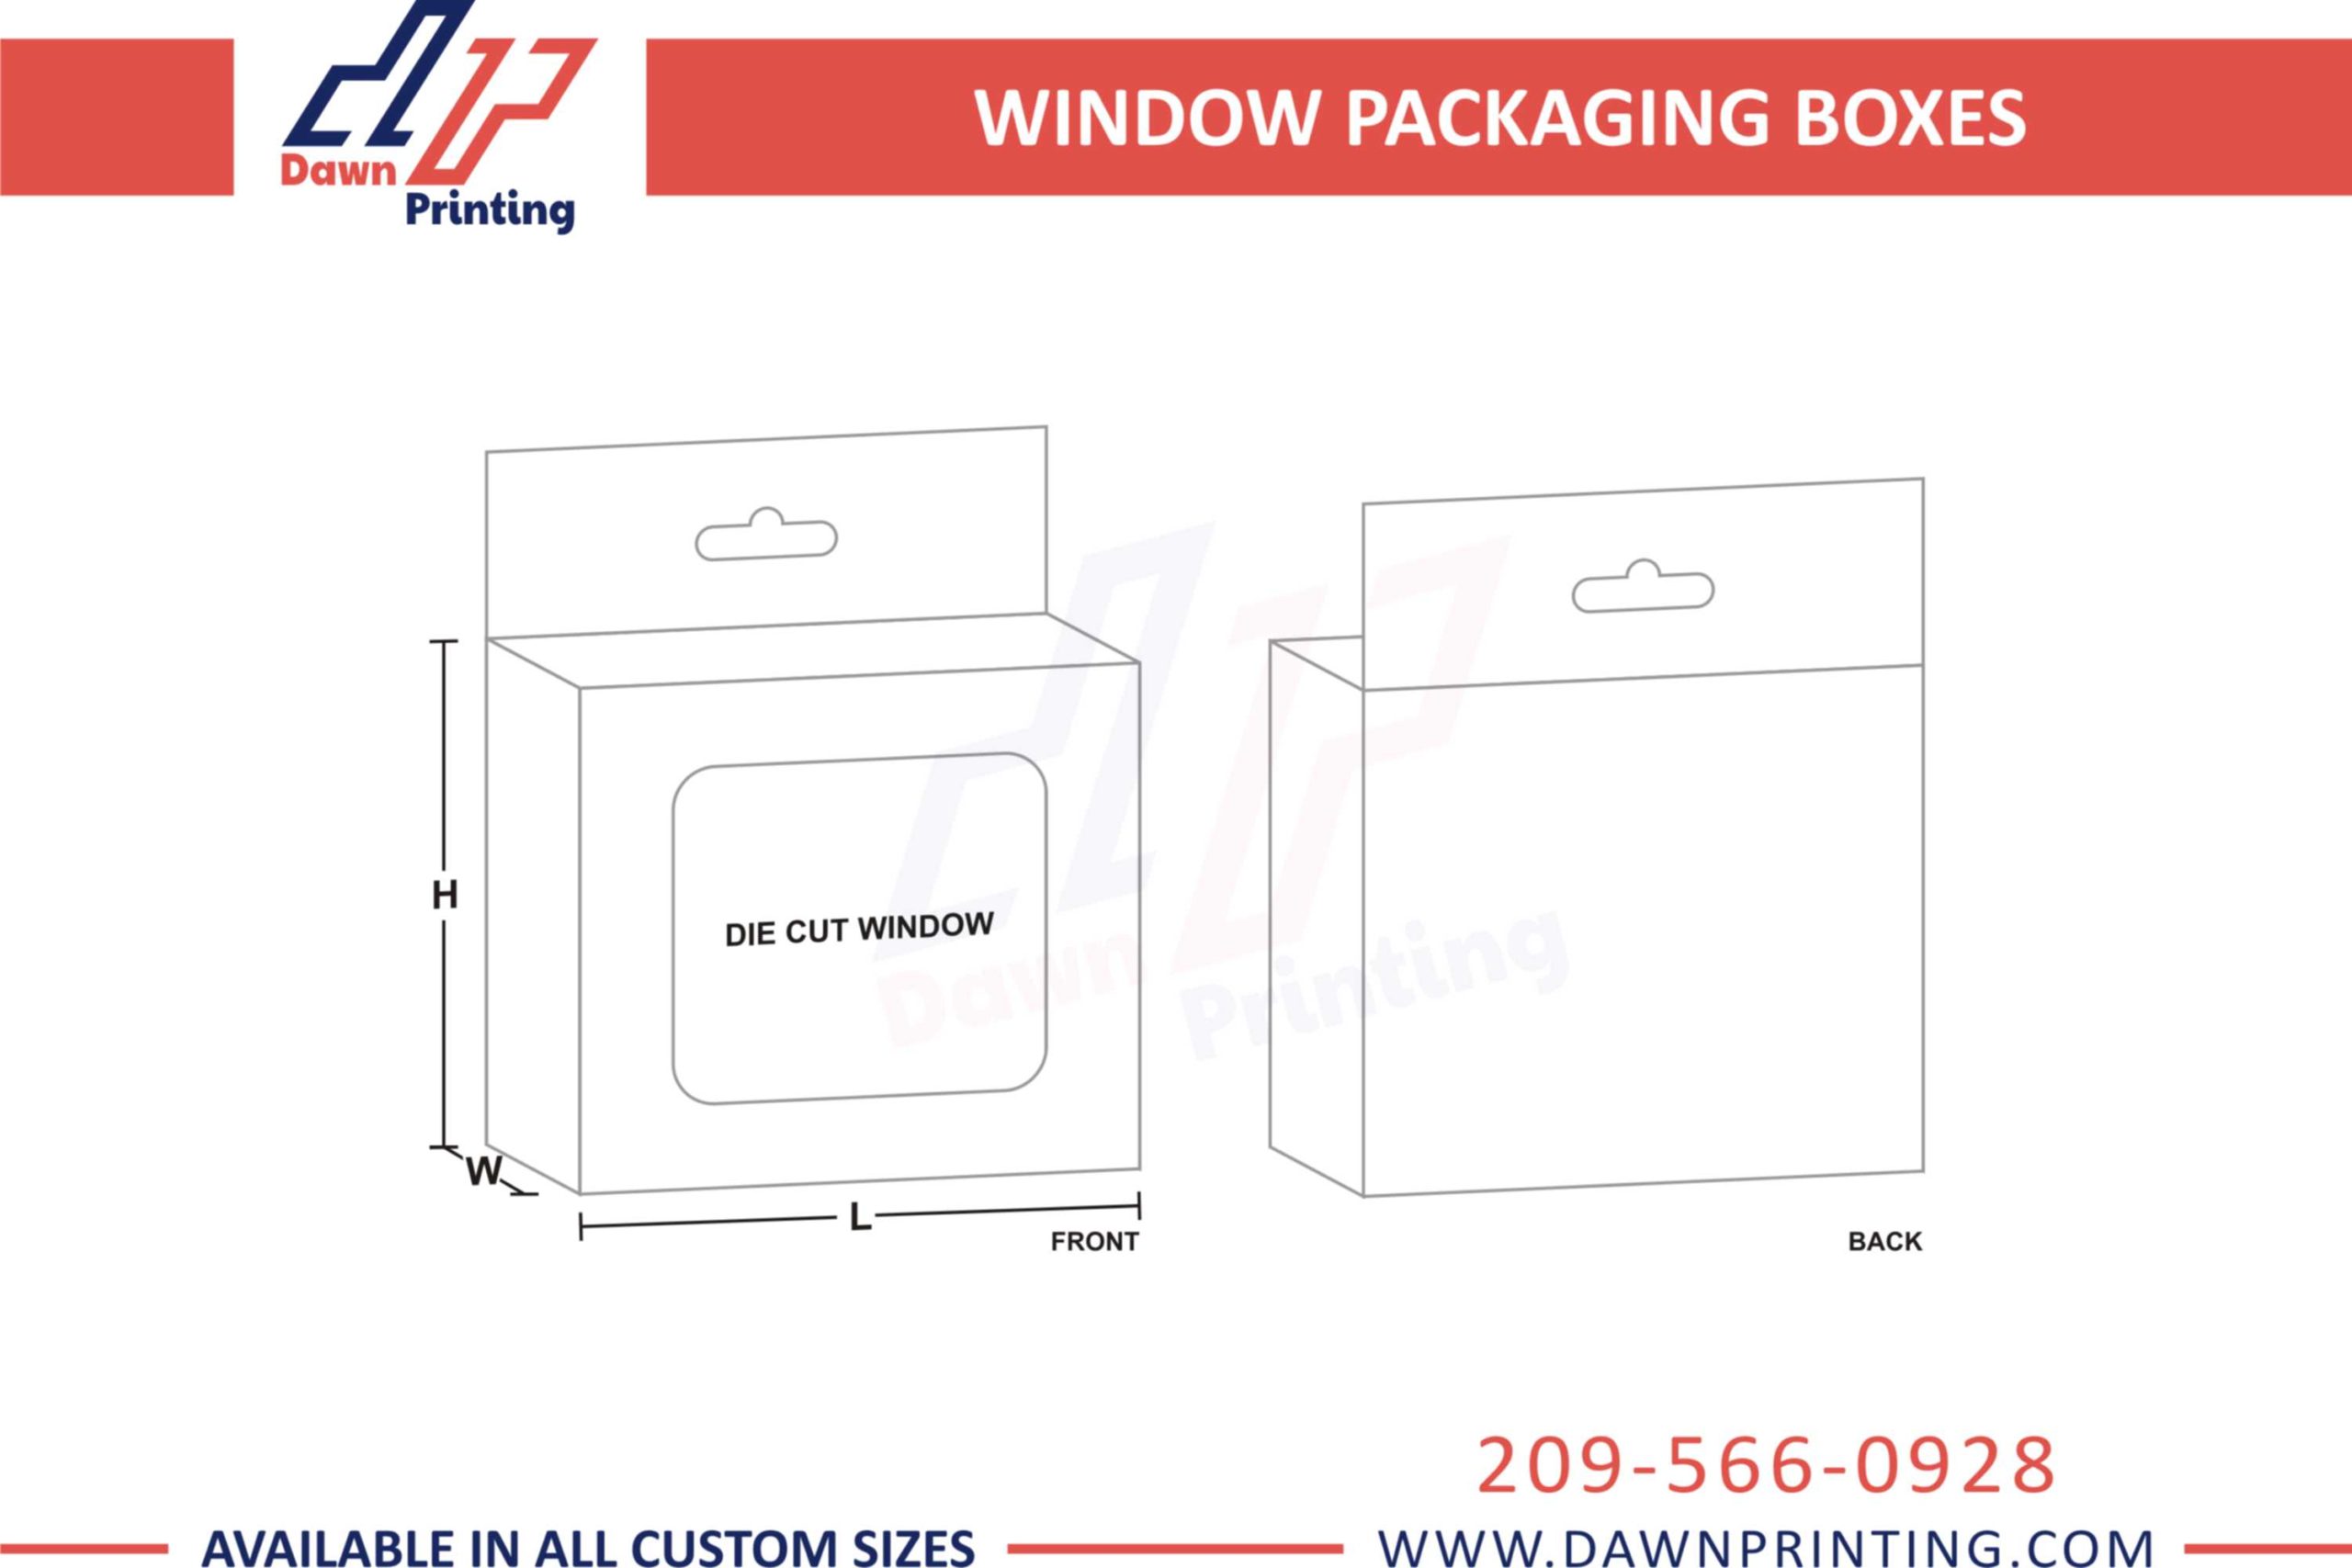 3D Window Packaging Boxes - Dawn Printing